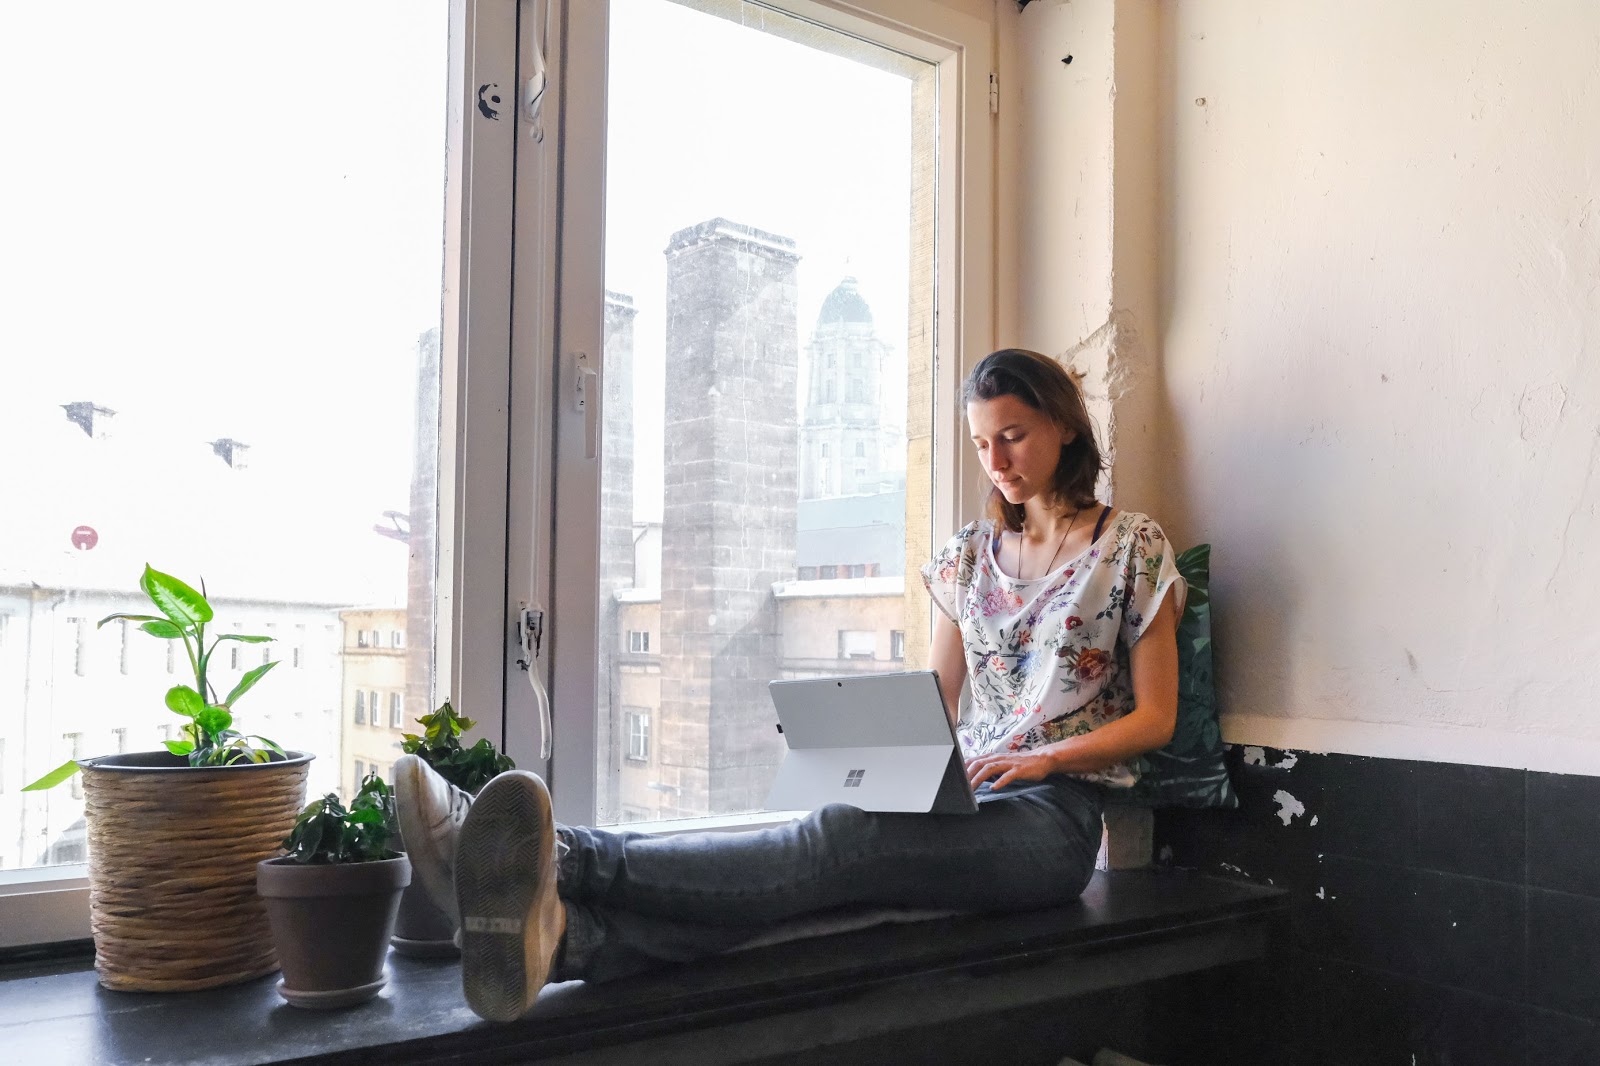 Jobs for introverts: A woman sits in a window and works on her laptop